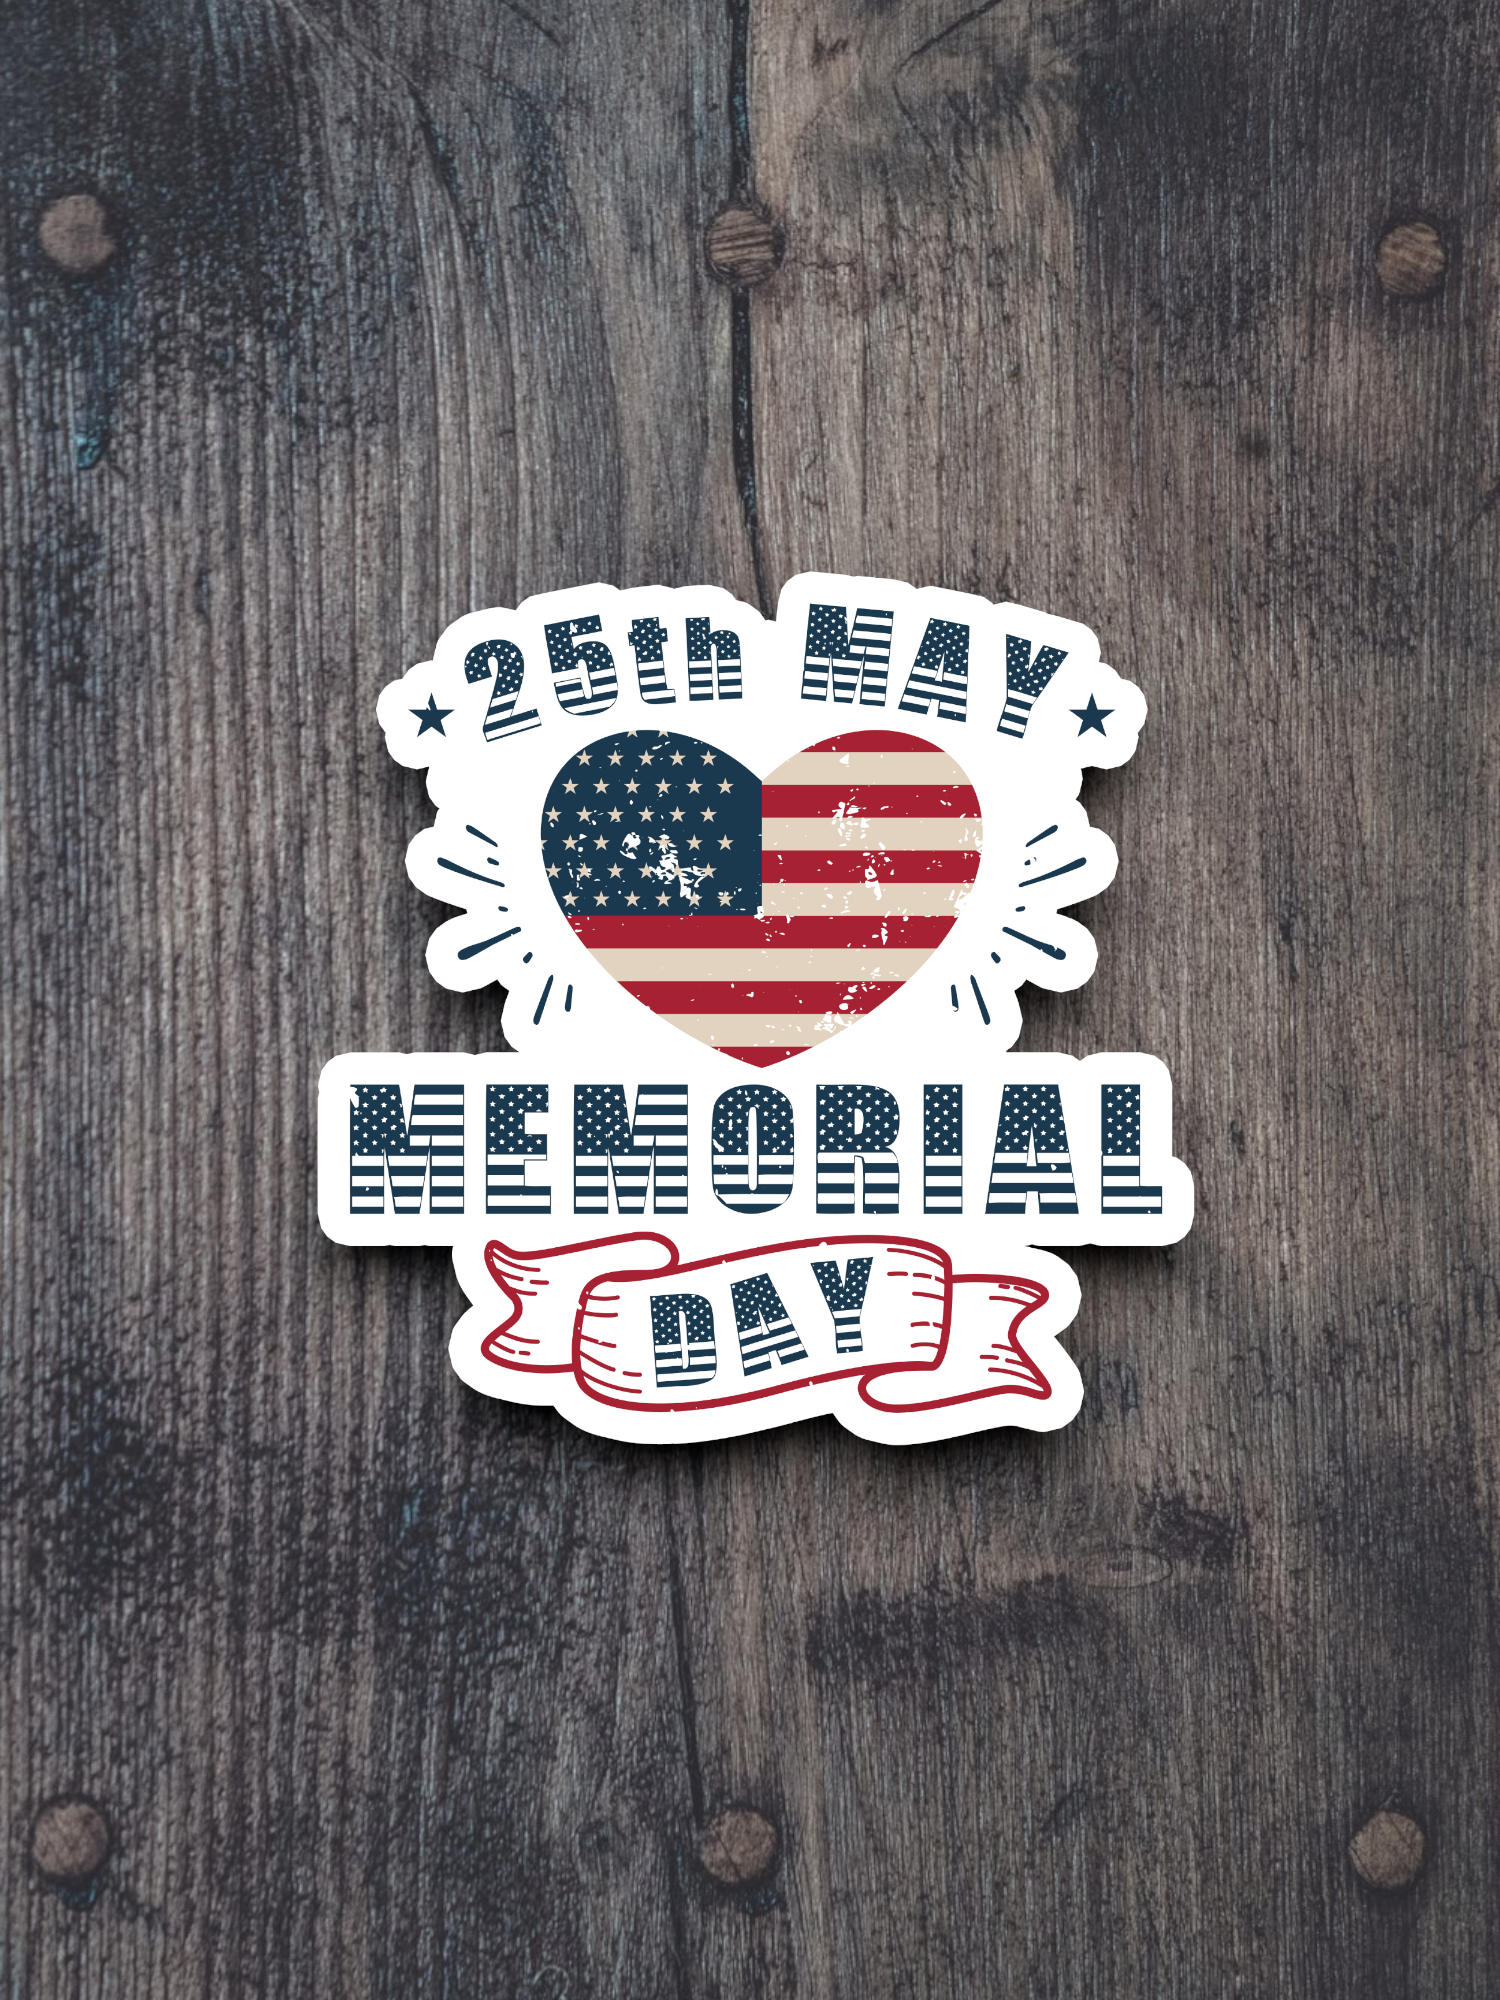 25th May Memorial Day Sticker